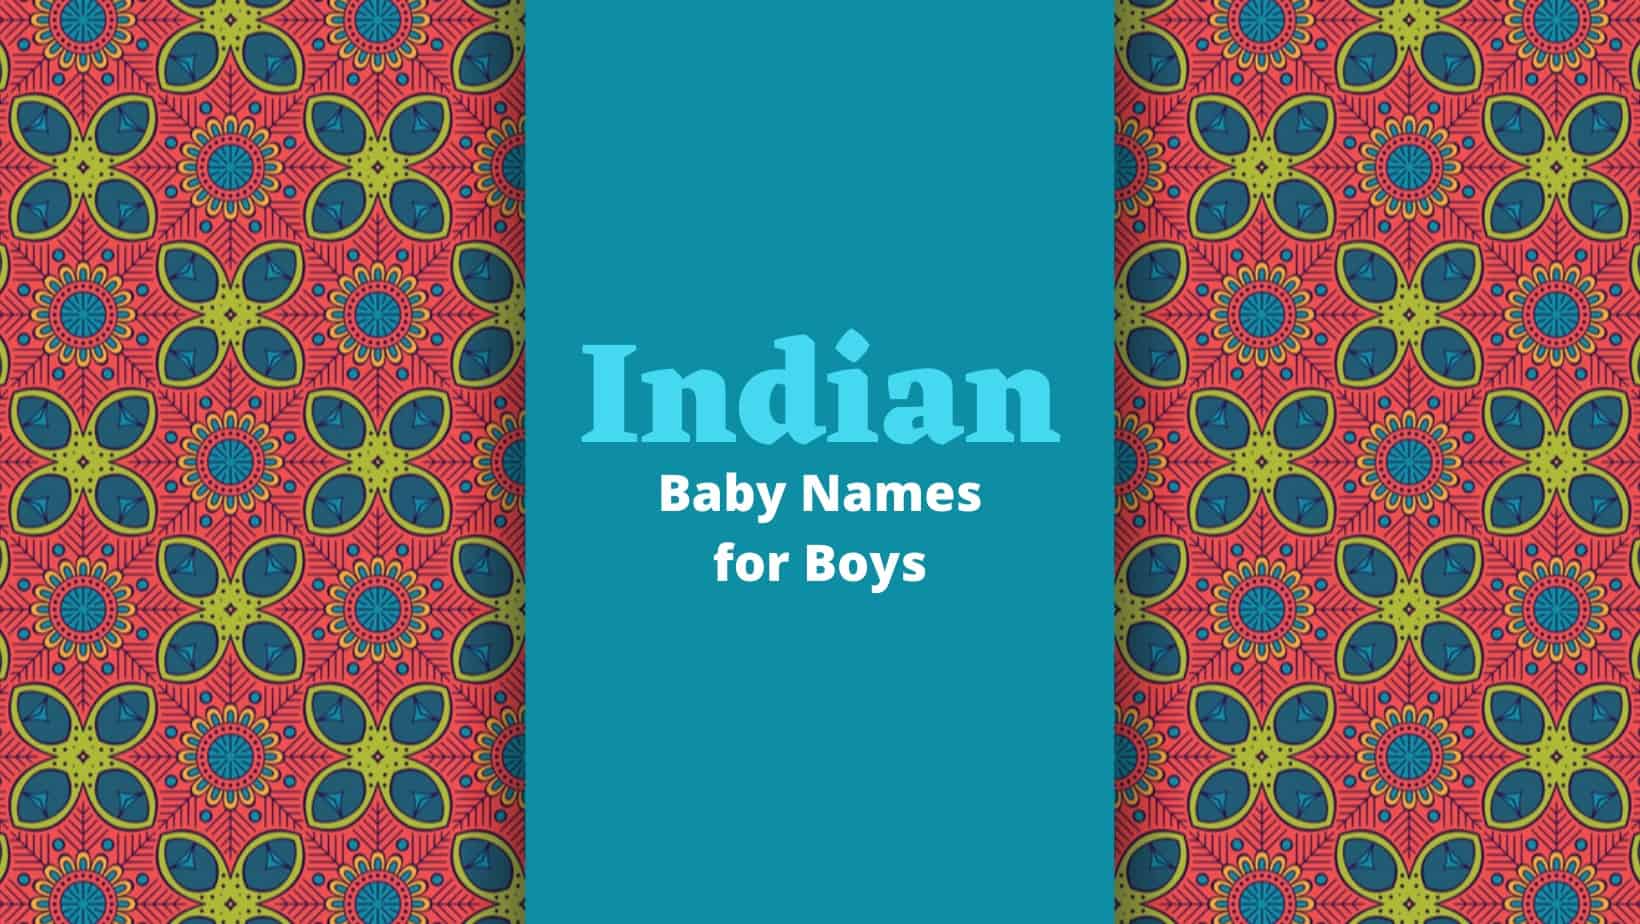 Indian Baby Names for boys